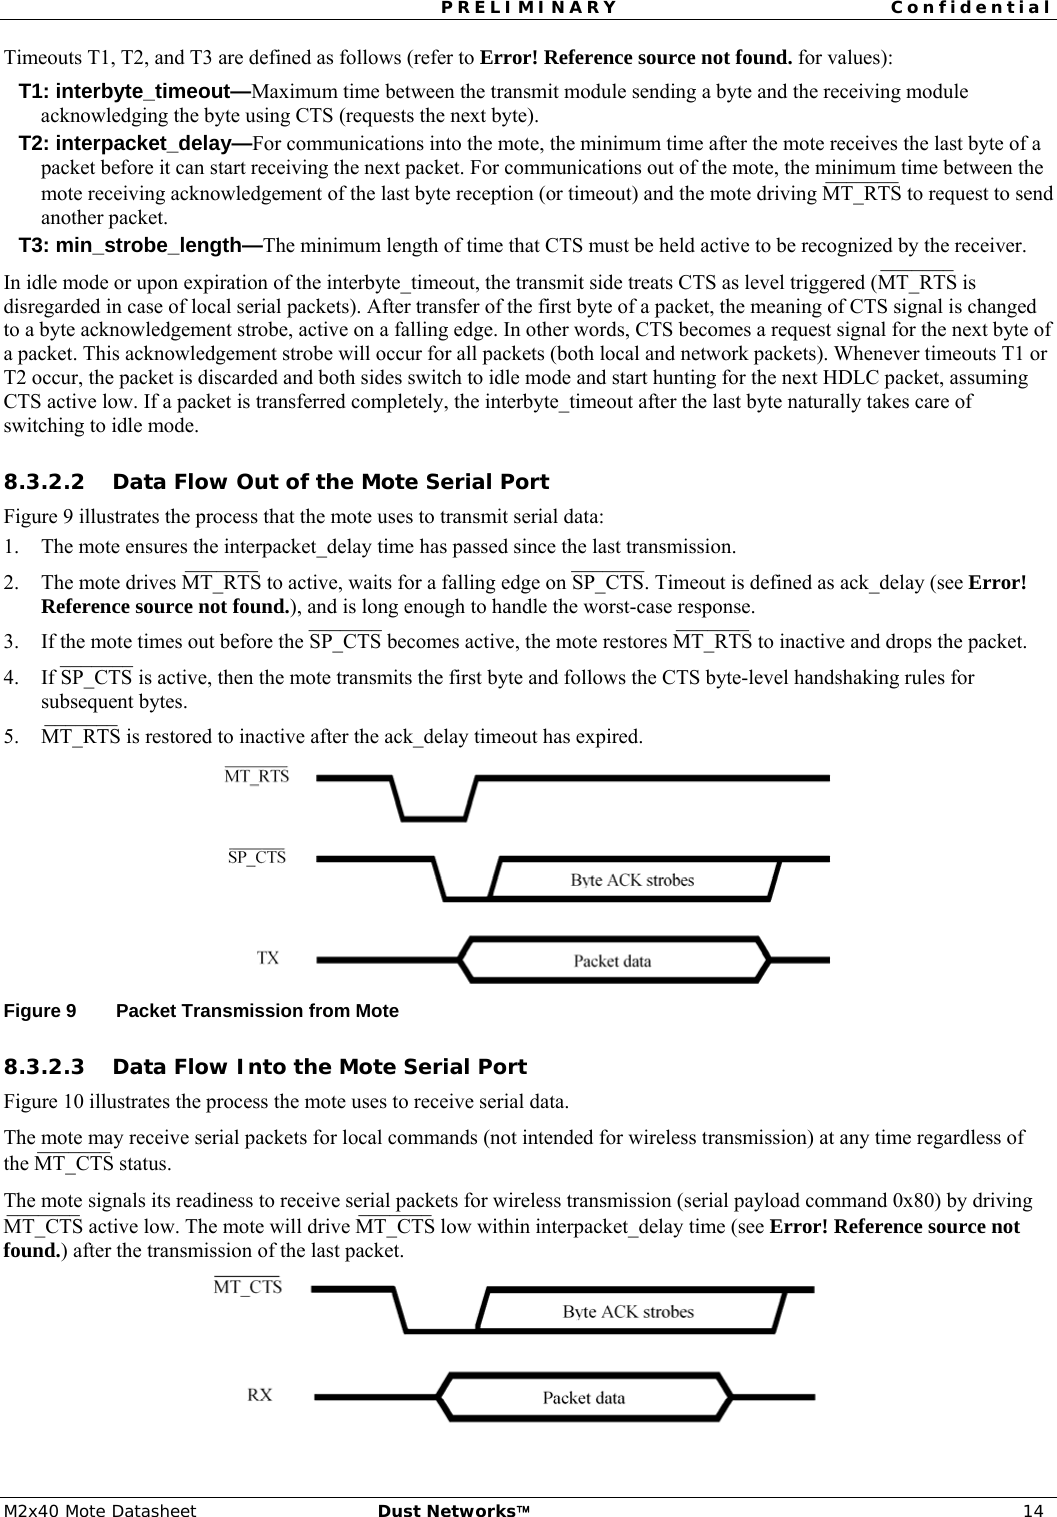 PRELIMINARY Confidential  M2x40 Mote Datasheet  Dust Networks™ 14 Timeouts T1, T2, and T3 are defined as follows (refer to Error! Reference source not found. for values): T1: interbyte_timeout—Maximum time between the transmit module sending a byte and the receiving module acknowledging the byte using CTS (requests the next byte). T2: interpacket_delay—For communications into the mote, the minimum time after the mote receives the last byte of a packet before it can start receiving the next packet. For communications out of the mote, the minimum time between the mote receiving acknowledgement of the last byte reception (or timeout) and the mote driving MT_RTS¯¯¯¯¯¯¯  to request to send another packet. T3: min_strobe_length—The minimum length of time that CTS must be held active to be recognized by the receiver. In idle mode or upon expiration of the interbyte_timeout, the transmit side treats CTS as level triggered (MT_RTS¯¯¯¯¯¯¯  is disregarded in case of local serial packets). After transfer of the first byte of a packet, the meaning of CTS signal is changed to a byte acknowledgement strobe, active on a falling edge. In other words, CTS becomes a request signal for the next byte of a packet. This acknowledgement strobe will occur for all packets (both local and network packets). Whenever timeouts T1 or T2 occur, the packet is discarded and both sides switch to idle mode and start hunting for the next HDLC packet, assuming CTS active low. If a packet is transferred completely, the interbyte_timeout after the last byte naturally takes care of switching to idle mode. 8.3.2.2 Data Flow Out of the Mote Serial Port Figure 9 illustrates the process that the mote uses to transmit serial data: 1. The mote ensures the interpacket_delay time has passed since the last transmission. 2. The mote drives MT_RTS¯¯¯¯¯¯¯  to active, waits for a falling edge on SP_CTS¯¯¯¯¯¯¯. Timeout is defined as ack_delay (see Error! Reference source not found.), and is long enough to handle the worst-case response. 3. If the mote times out before the SP_CTS¯¯¯¯¯¯¯ becomes active, the mote restores MT_RTS¯¯¯¯¯¯¯  to inactive and drops the packet. 4. If SP_CTS¯¯¯¯¯¯¯ is active, then the mote transmits the first byte and follows the CTS byte-level handshaking rules for subsequent bytes.  5. MT_RTS¯¯¯¯¯¯¯  is restored to inactive after the ack_delay timeout has expired.   Figure 9  Packet Transmission from Mote 8.3.2.3 Data Flow Into the Mote Serial Port Figure 10 illustrates the process the mote uses to receive serial data. The mote may receive serial packets for local commands (not intended for wireless transmission) at any time regardless of the MT_CTS¯¯¯¯¯¯¯  status.  The mote signals its readiness to receive serial packets for wireless transmission (serial payload command 0x80) by driving MT_CTS¯¯¯¯¯¯¯  active low. The mote will drive MT_CTS¯¯¯¯¯¯¯  low within interpacket_delay time (see Error! Reference source not found.) after the transmission of the last packet.  